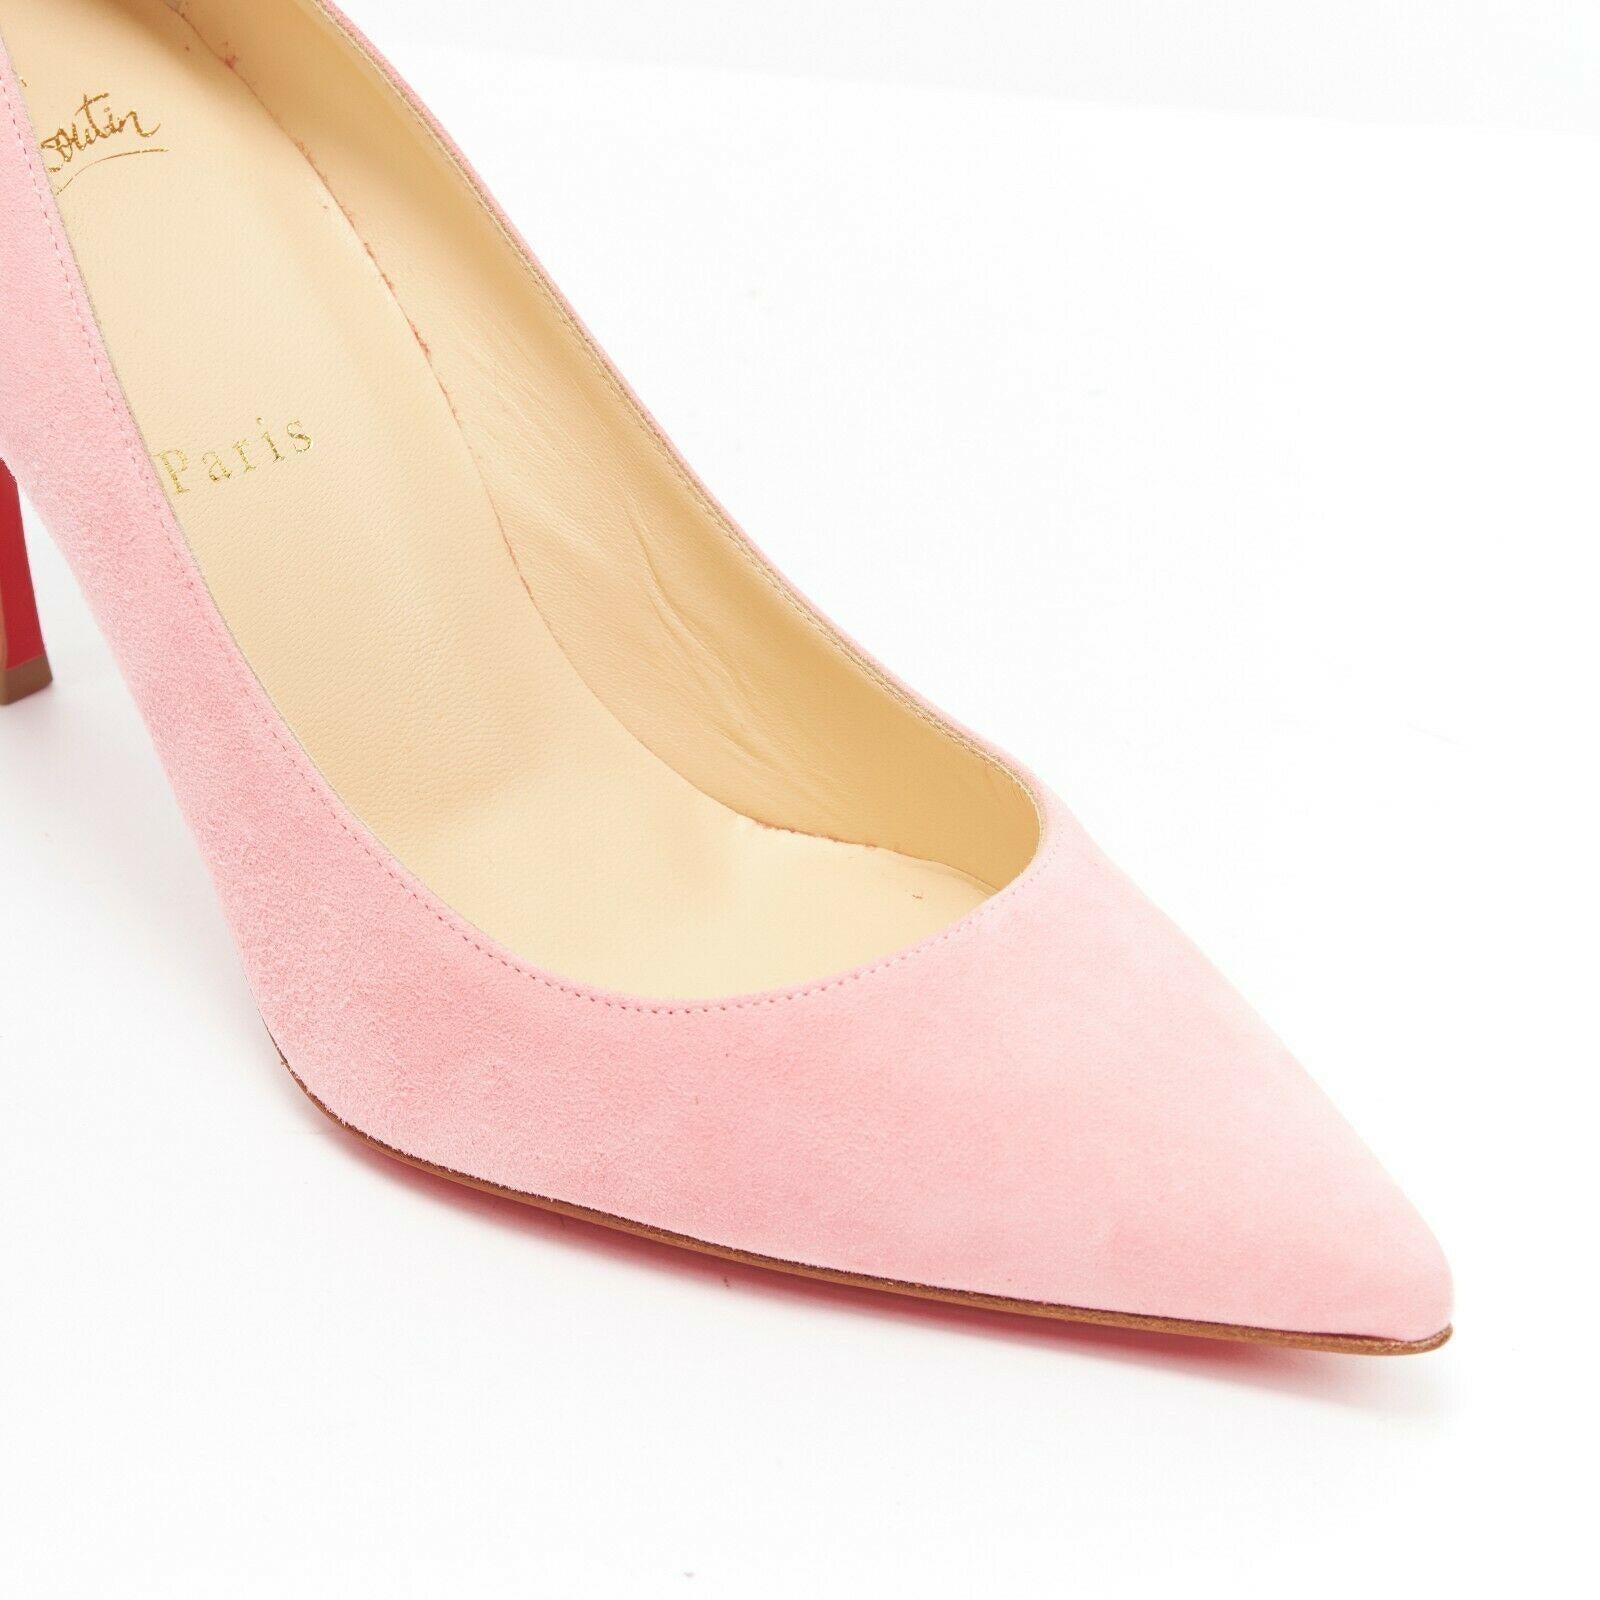 Women's new CHRISTIAN LOUBOUTIN Decoltish 85 Dolly pink suede pointy pigalle pump EU39.5